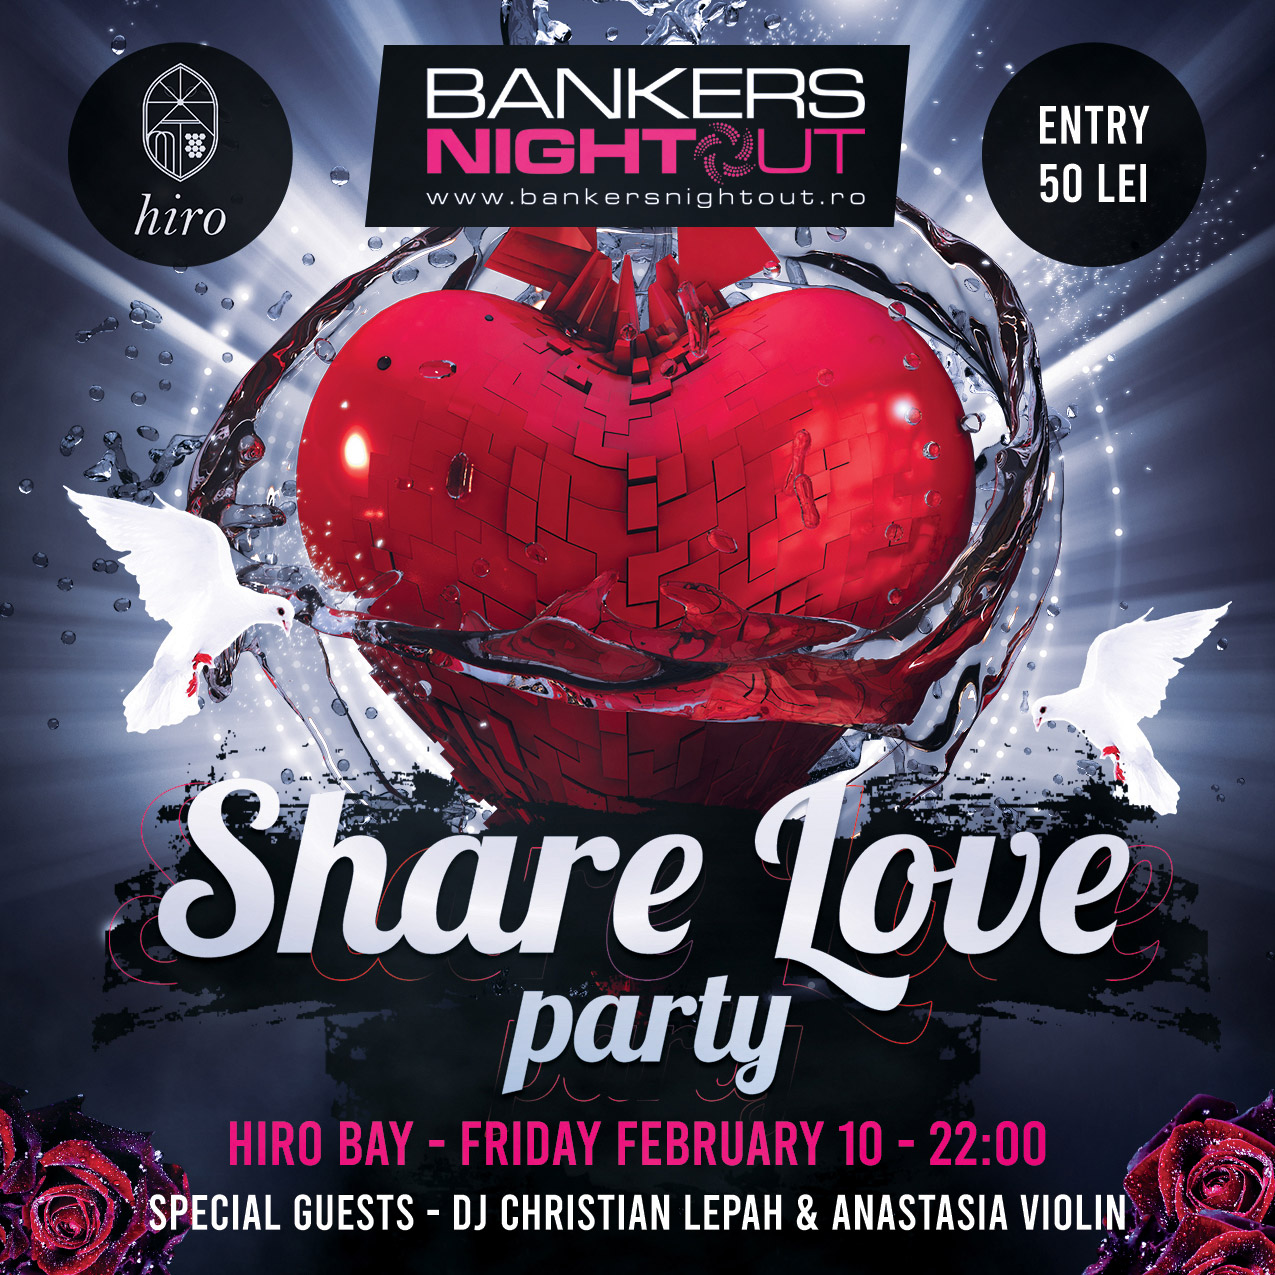 Bankers Night Out - Share Love Party 2023! - Do you want to party with your friends from banking?